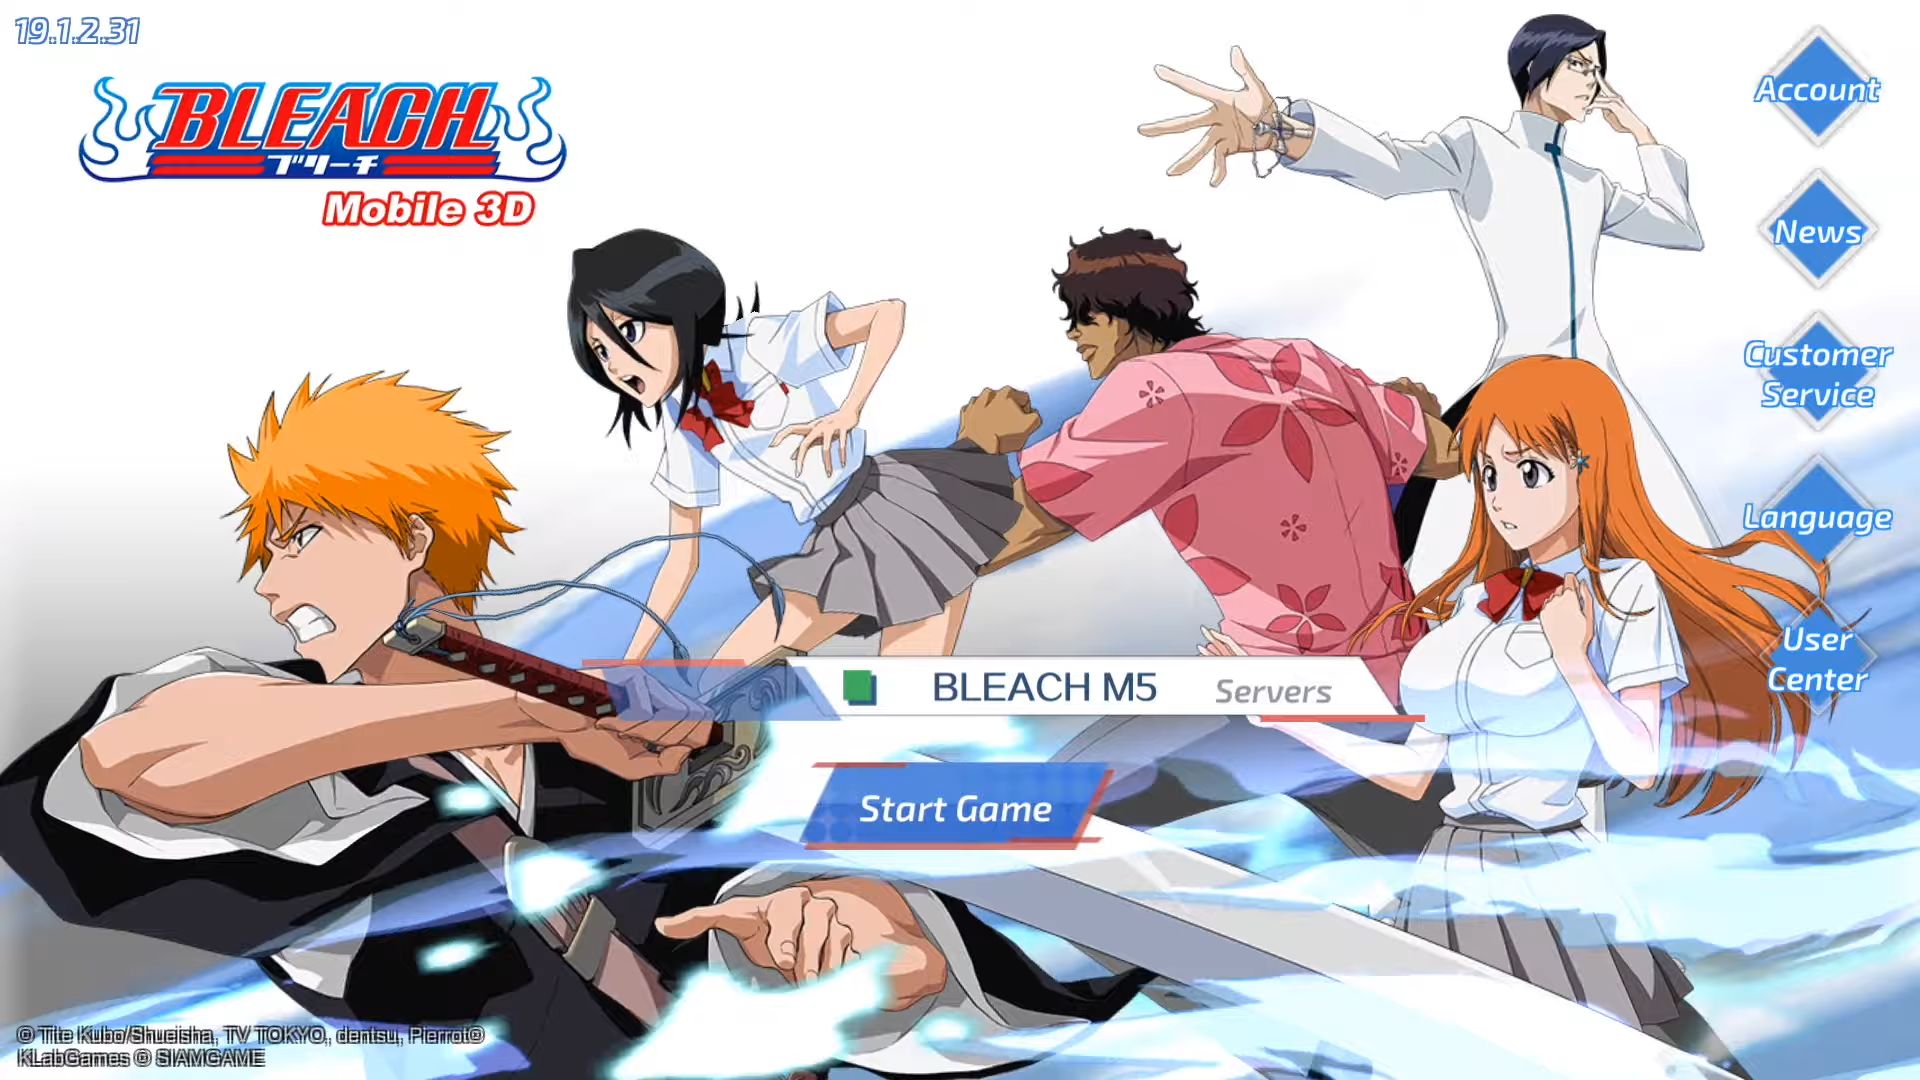 Download BLEACH Mobile 3D Android free game.